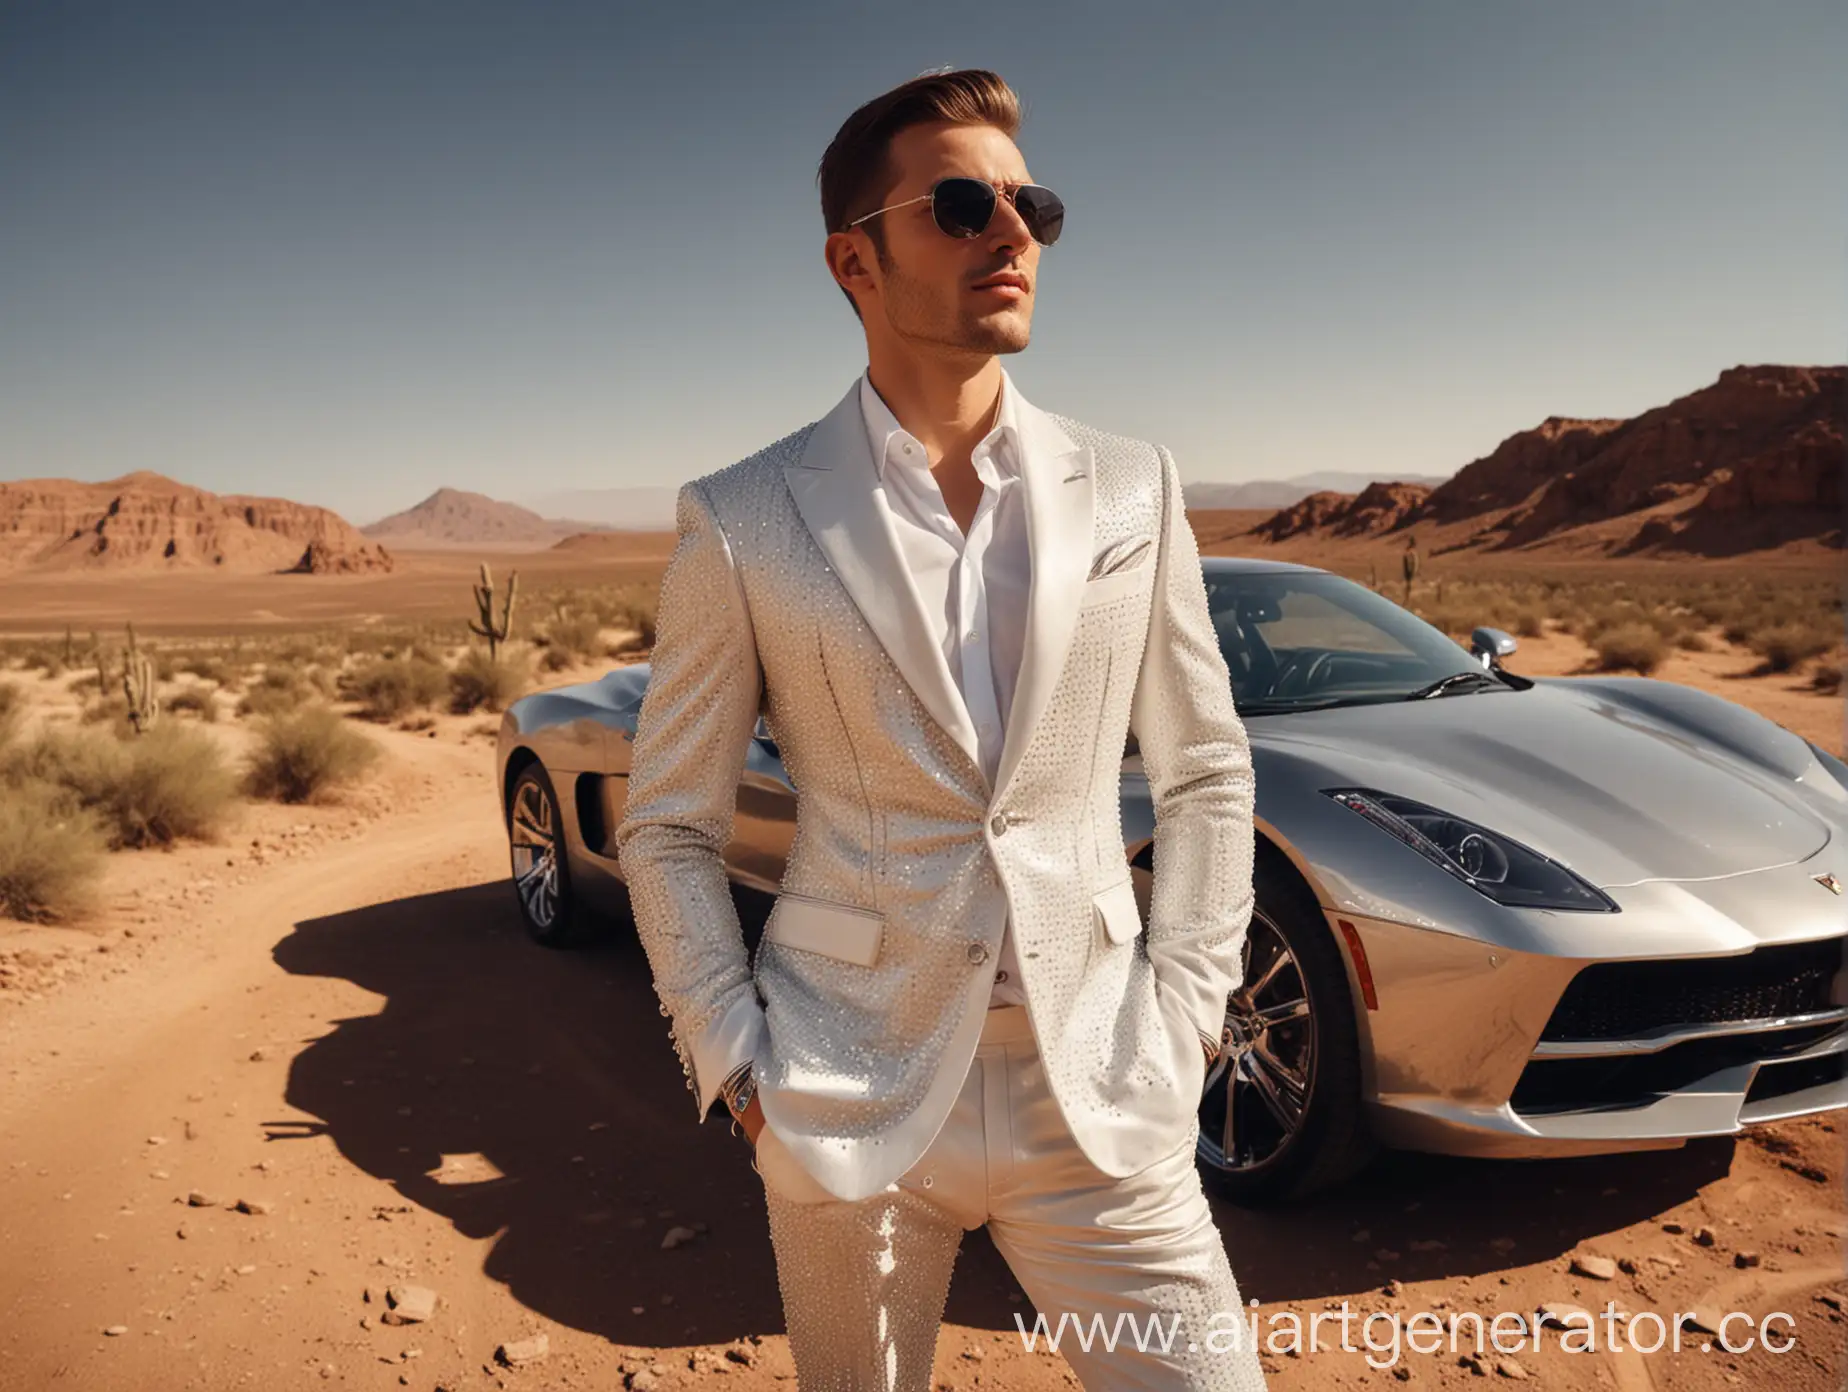 Stylish-Man-in-Rhinestone-Suit-Poses-with-Supercar-in-Desert